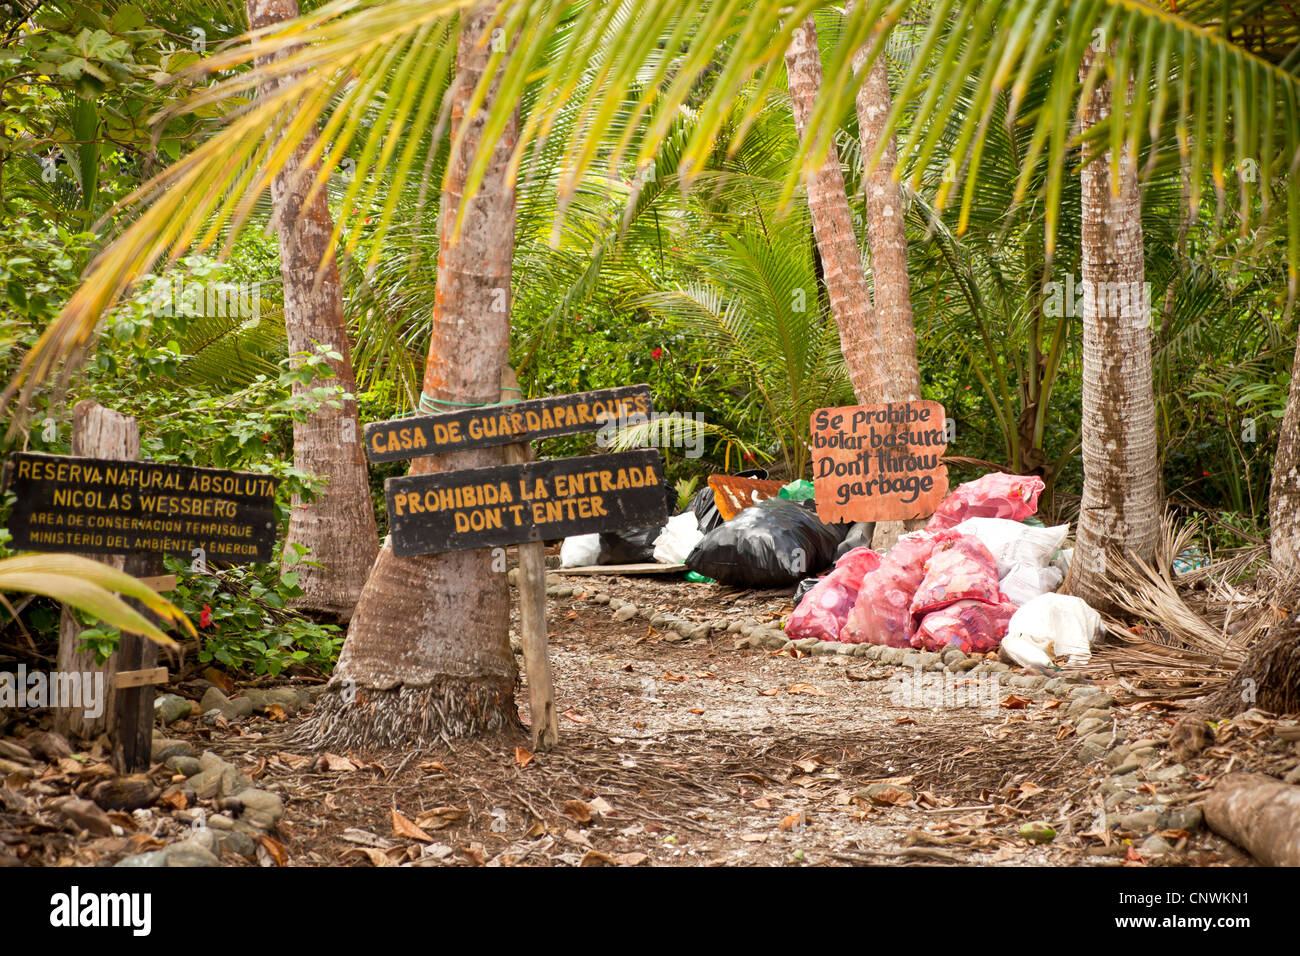 garbage at the entrance to Nicolas Wessberg Absolute Natural Reserve, Montezuma, Nicoya Peninsula, Costa Rica, Central America Stock Photo